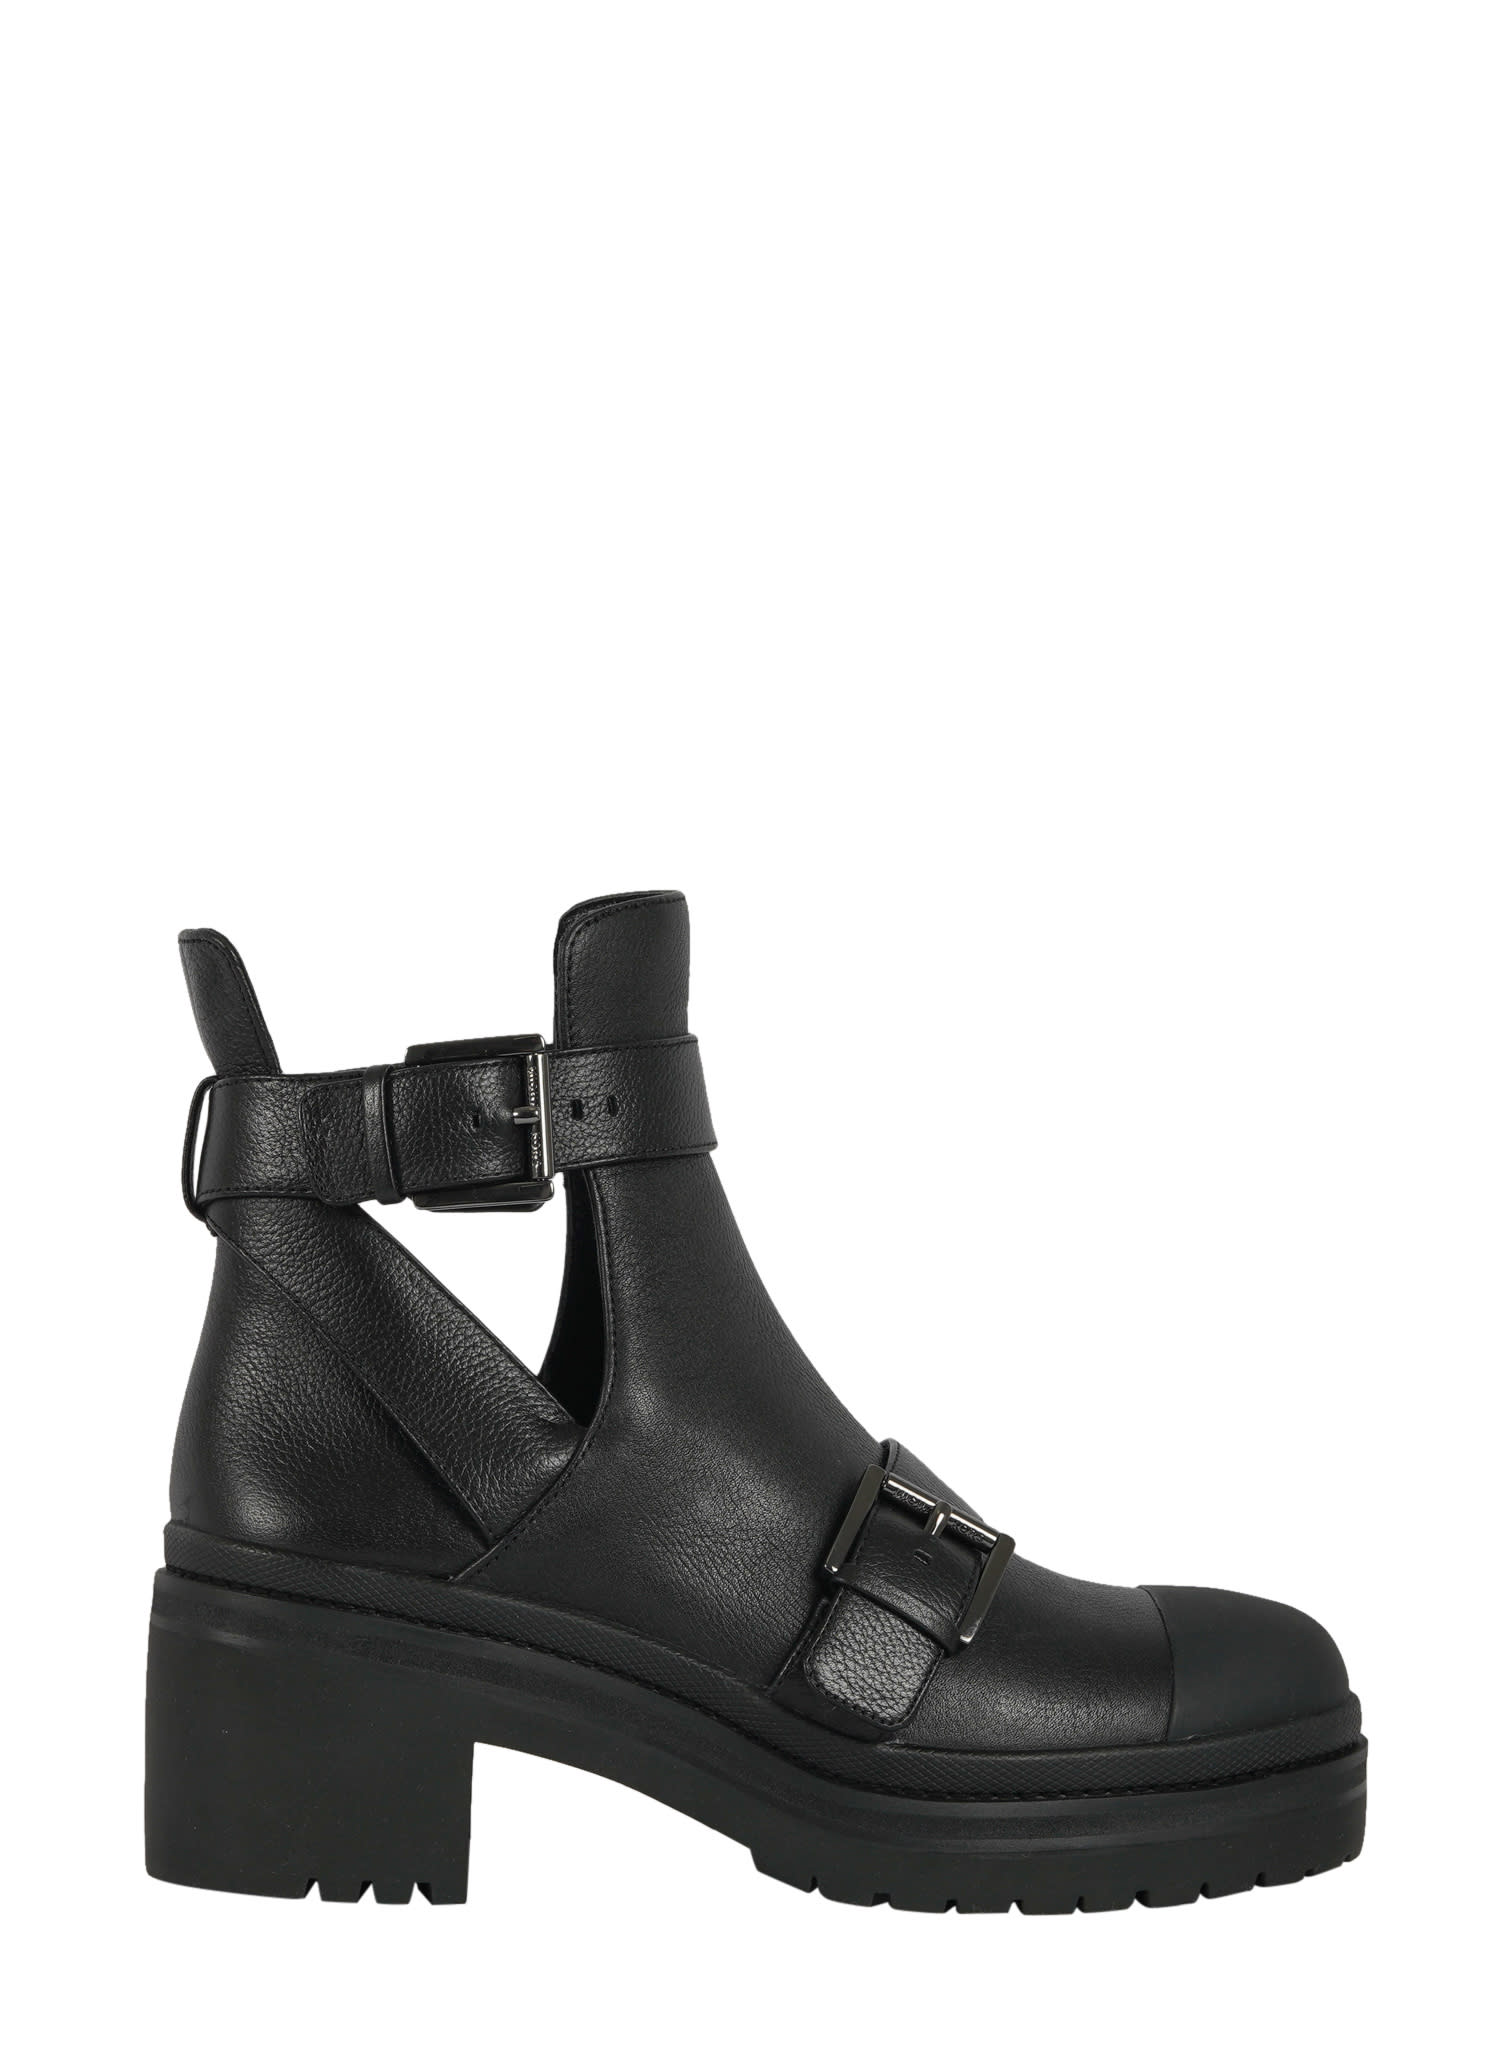 Michael Kors Corey Ankle Boot Boots